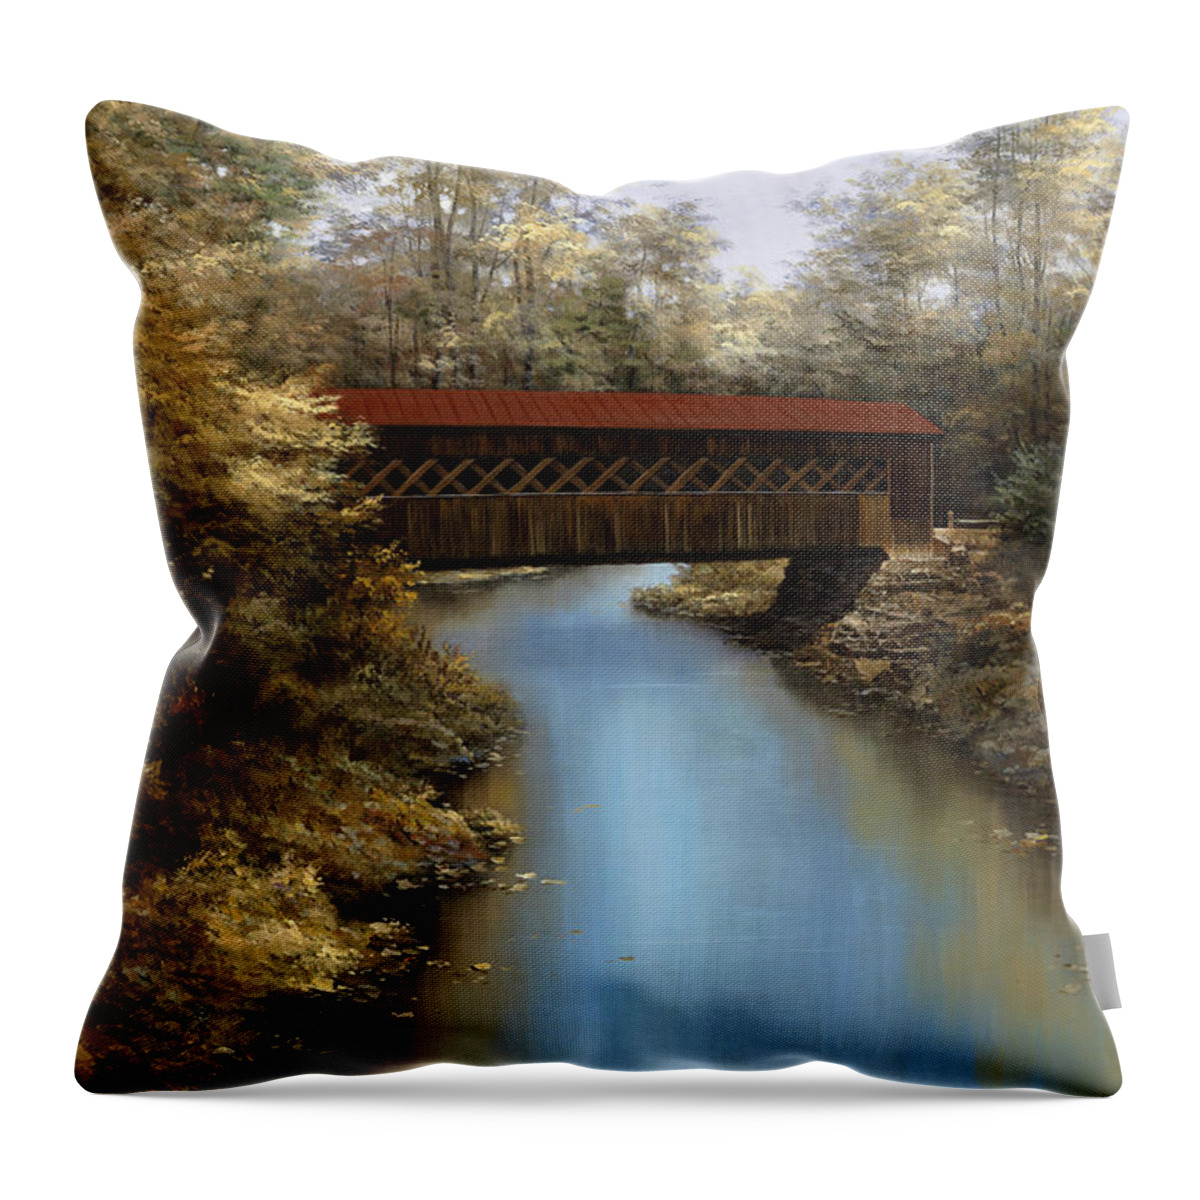 Covered Bridge Prints Throw Pillow featuring the painting Covered Bridge by Diane Romanello